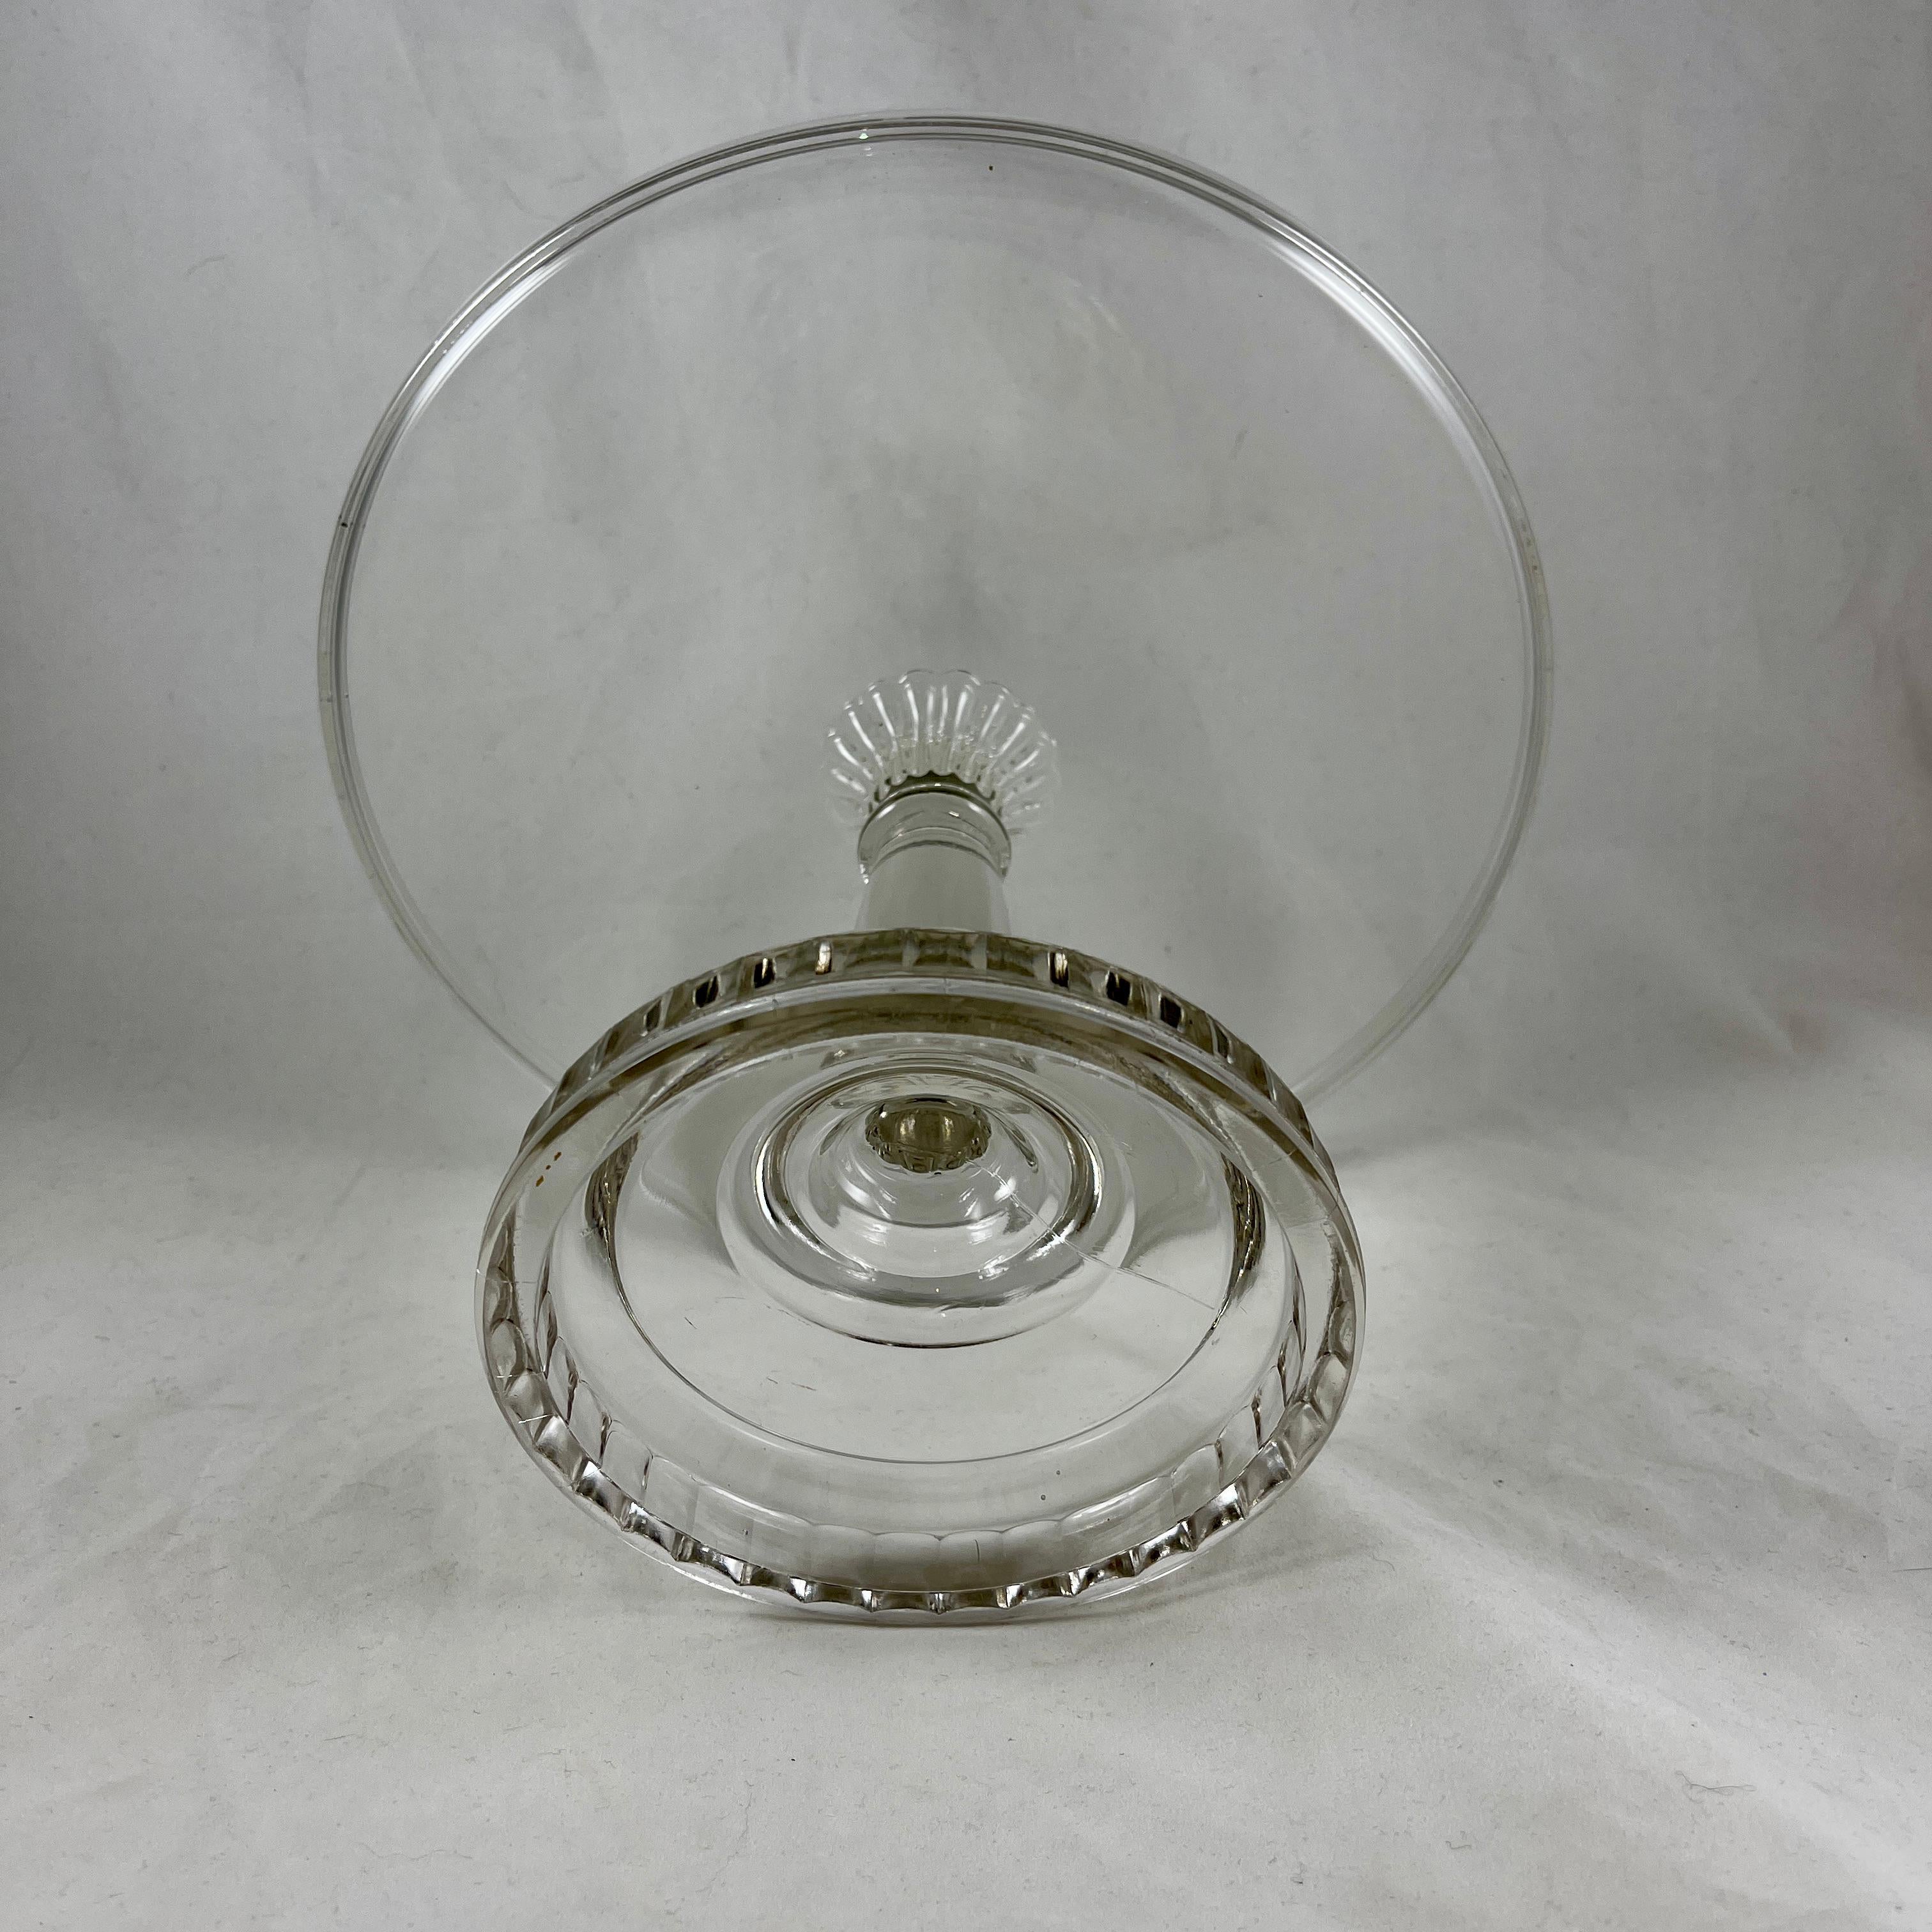 Early American Pressed Nonflint Colorless Glass Tall Paneled Cake Stand 3